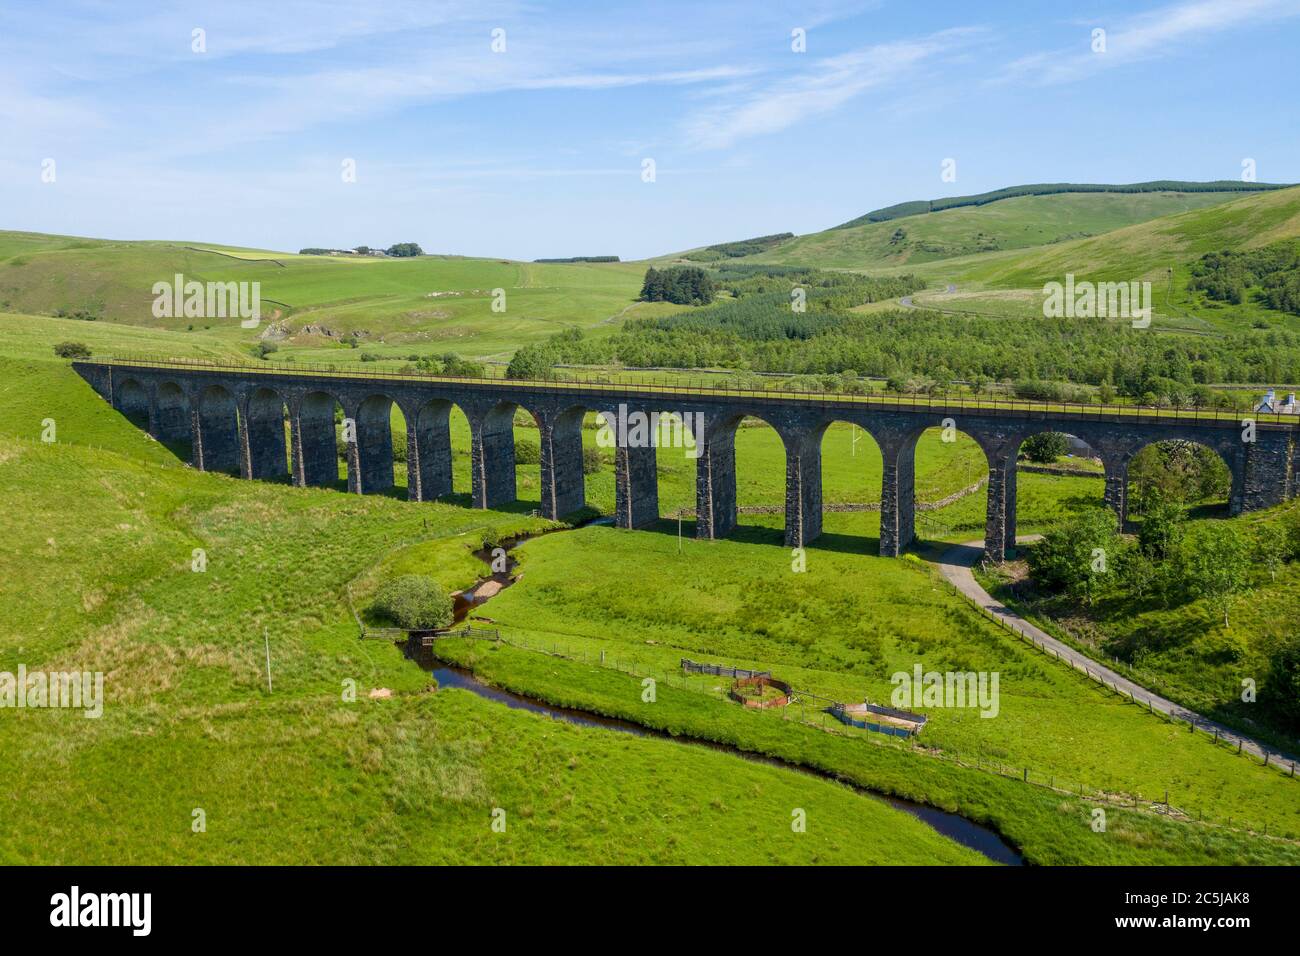 The Shankend viaduct near Hawick in the Scottish Borders. The viaduct on the Waverley Line was closed down in 1969 as a result of the Beeching report. Stock Photo